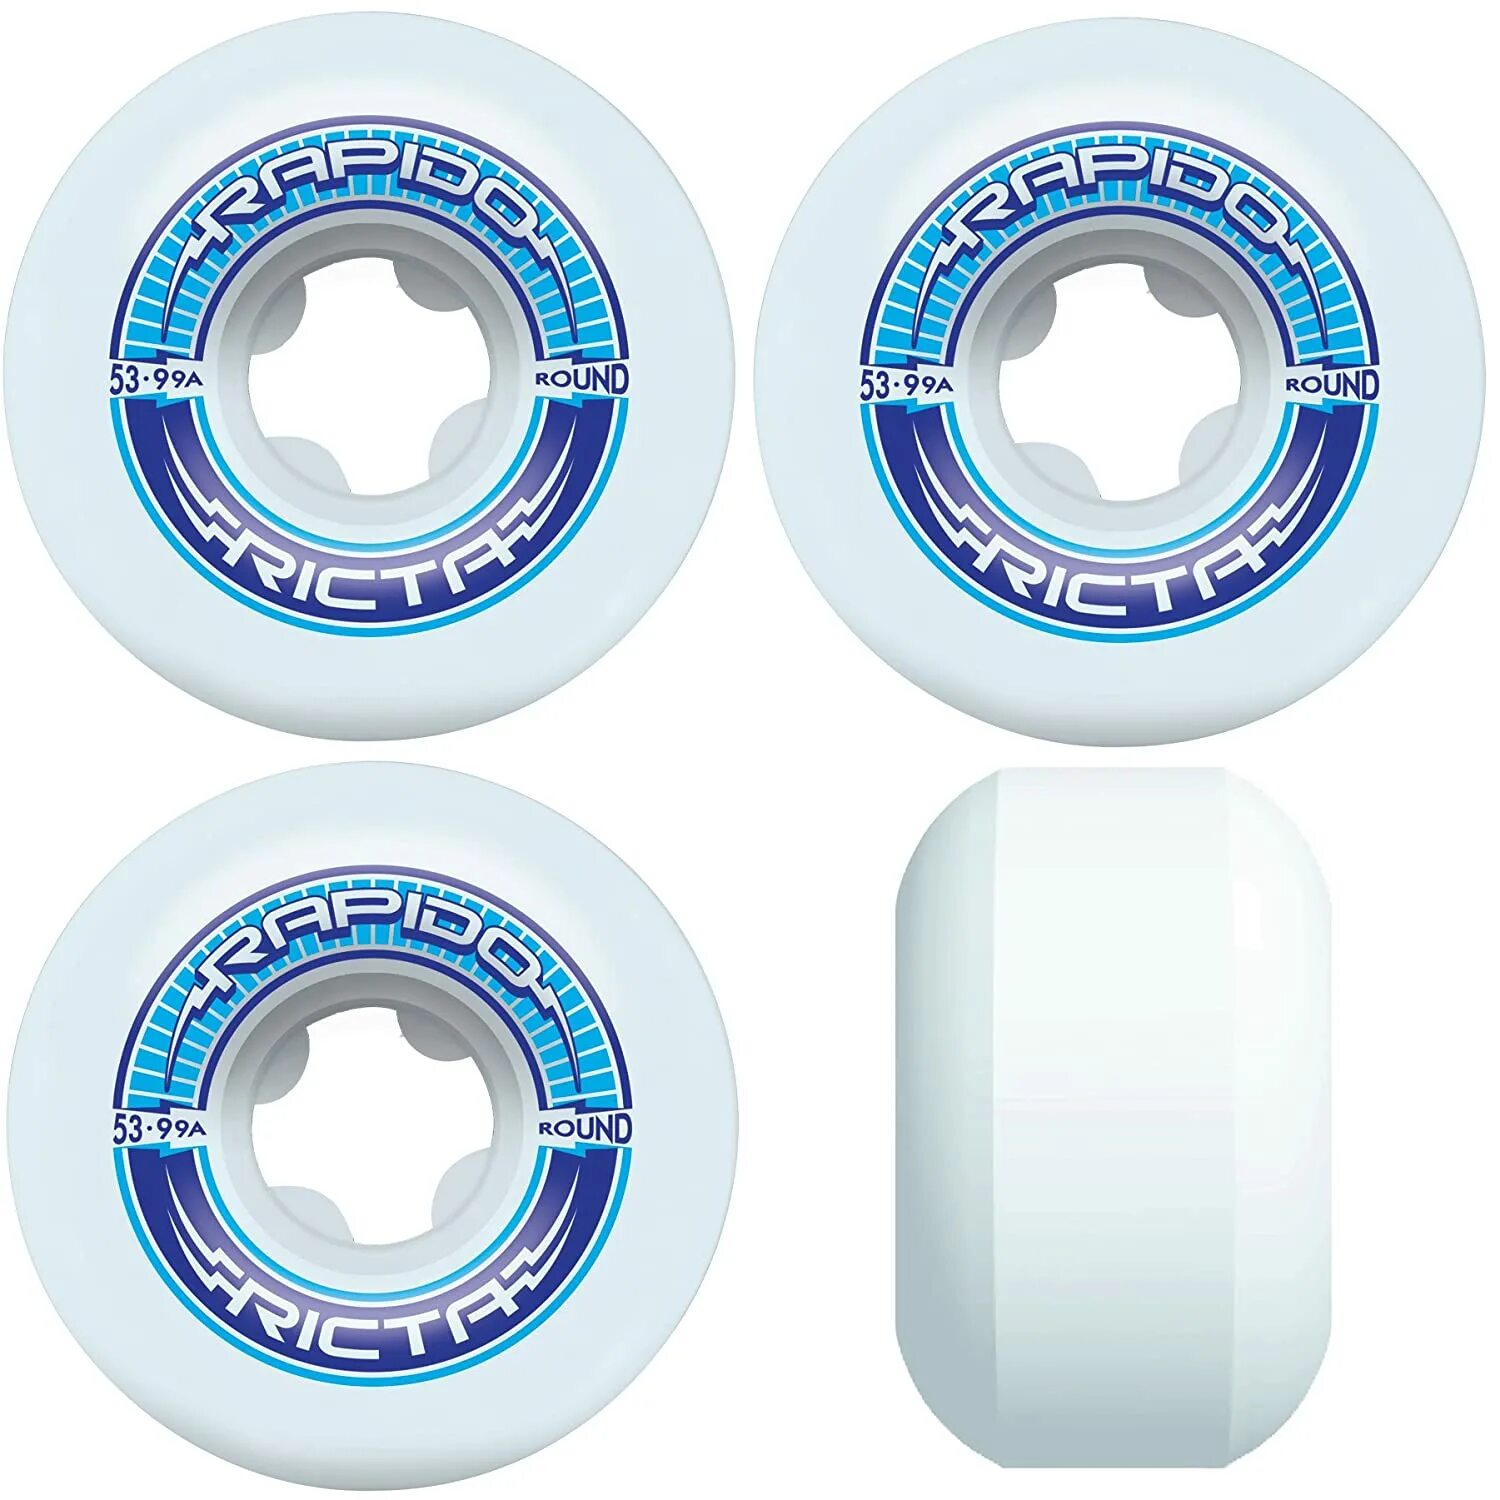 Www rounds. Ricta Sparx. Ricta Speedrings wide. Колеса Solid line Wheel gt Urethane 53 мм 101a. Ricta Sparx 54 99 a.